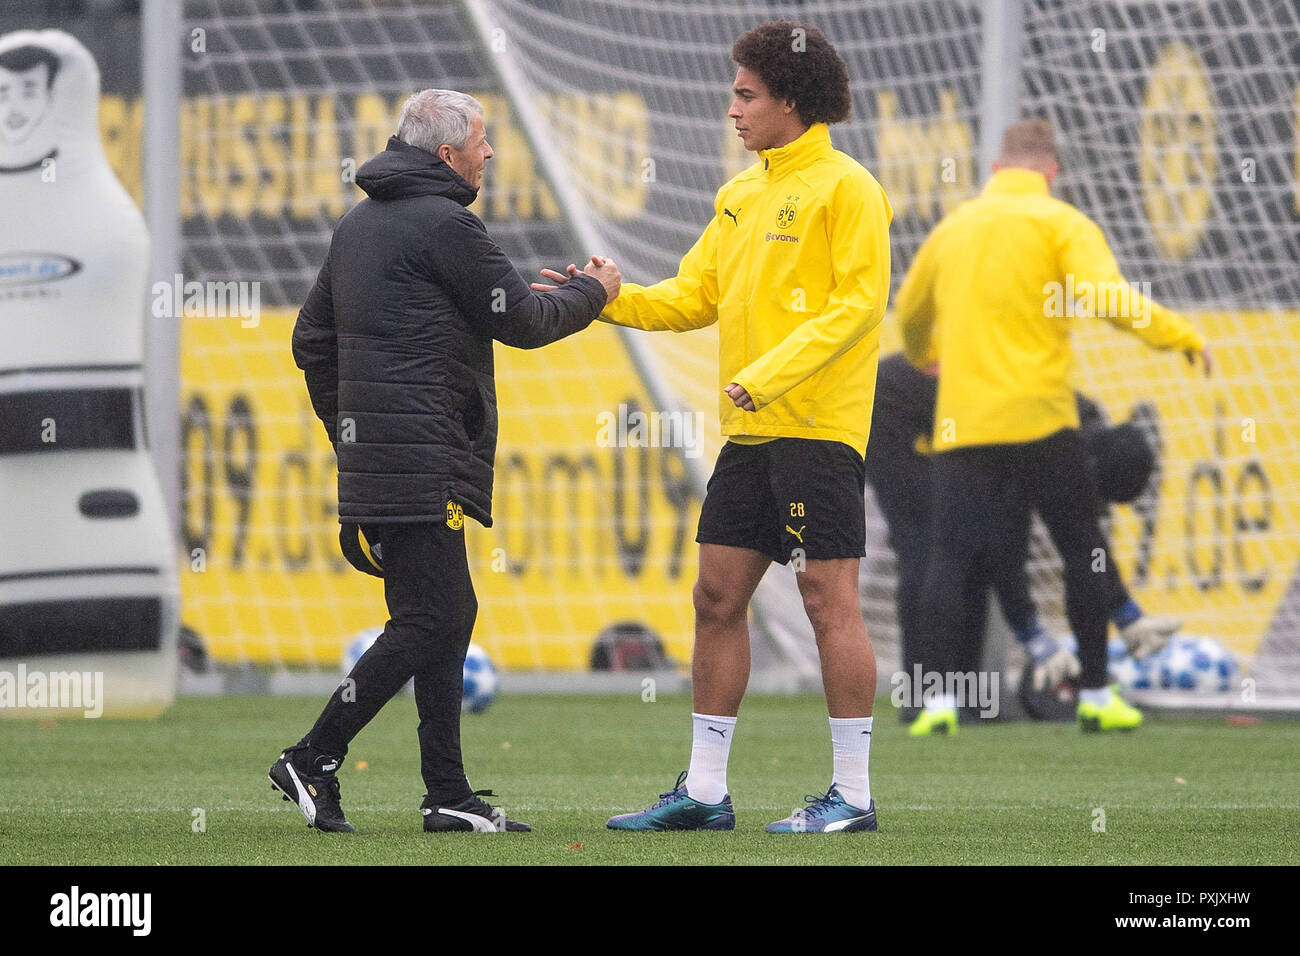 Dortmund, Germany. 23rd Oct, 2018. Dortmund coach Lucien Favre (l) welcomes player Axel Witsel before the training. BVB will face Atletico Madrid on the 3rd matchday of Group A of the Champions League. Credit: Marius Becker/dpa/Alamy Live News Stock Photo